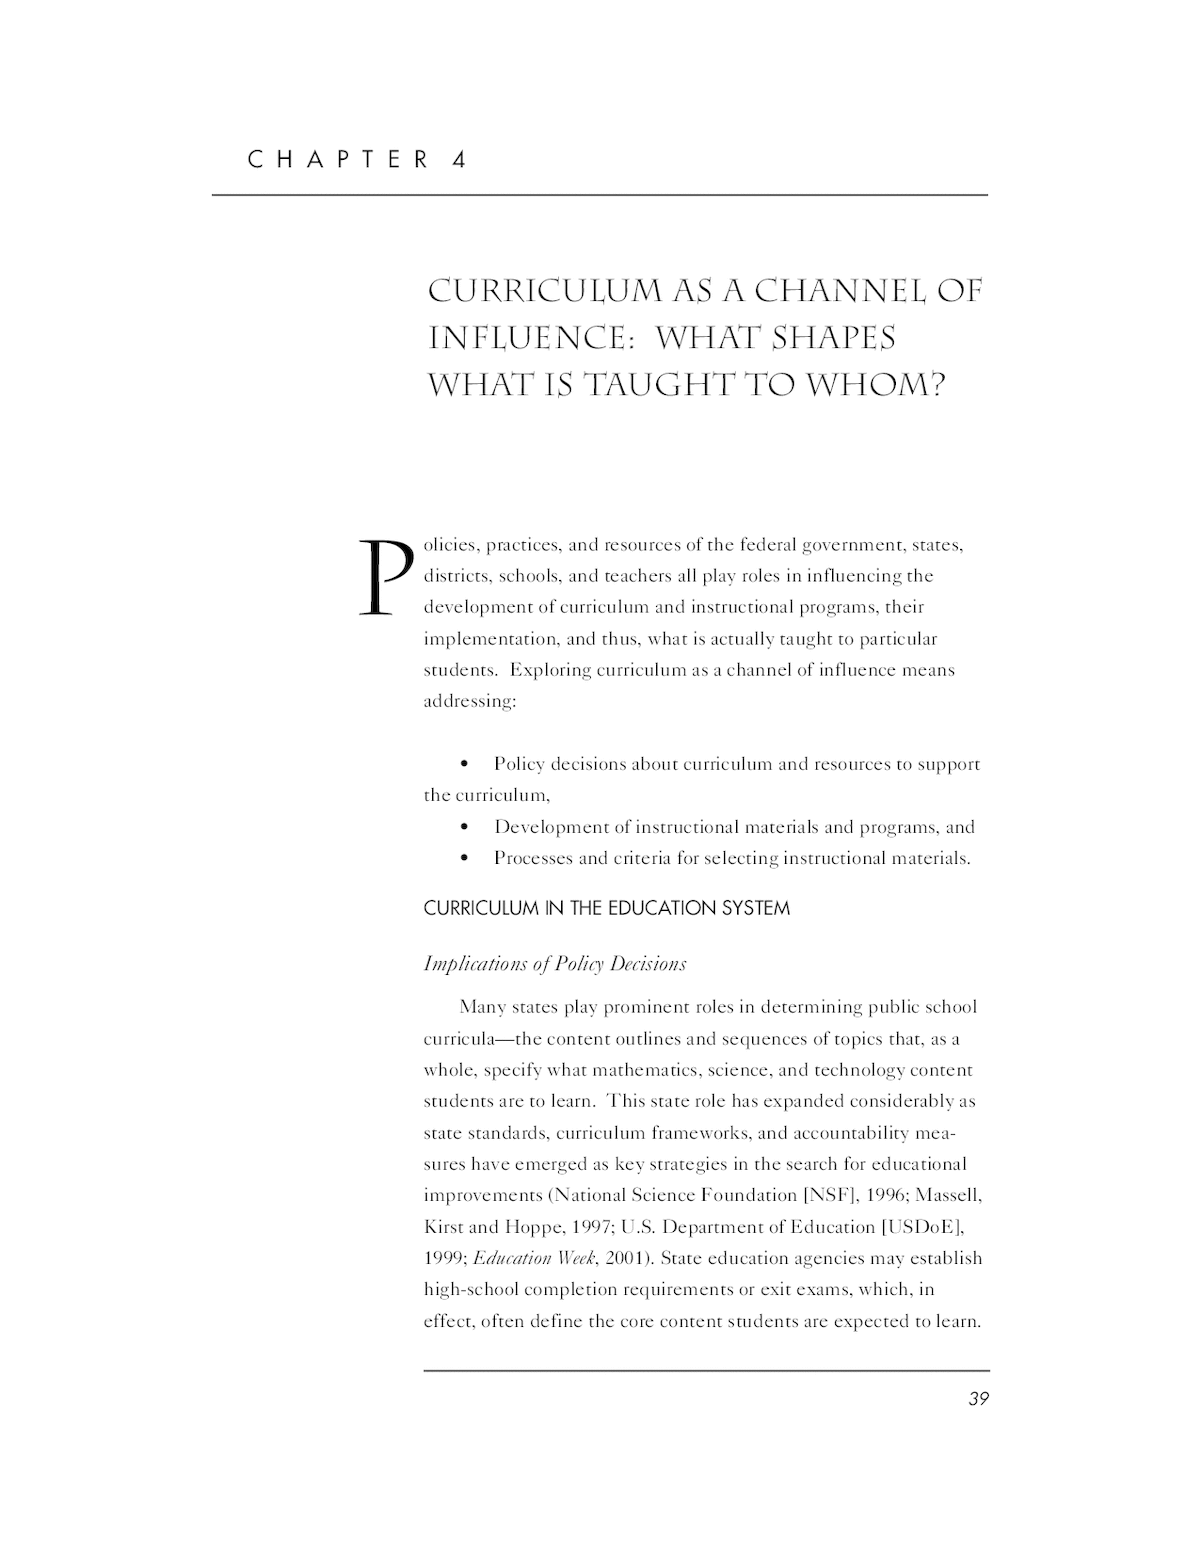 chapter-4-curriculum-as-a-channel-of-influence-what-shapes-what-is